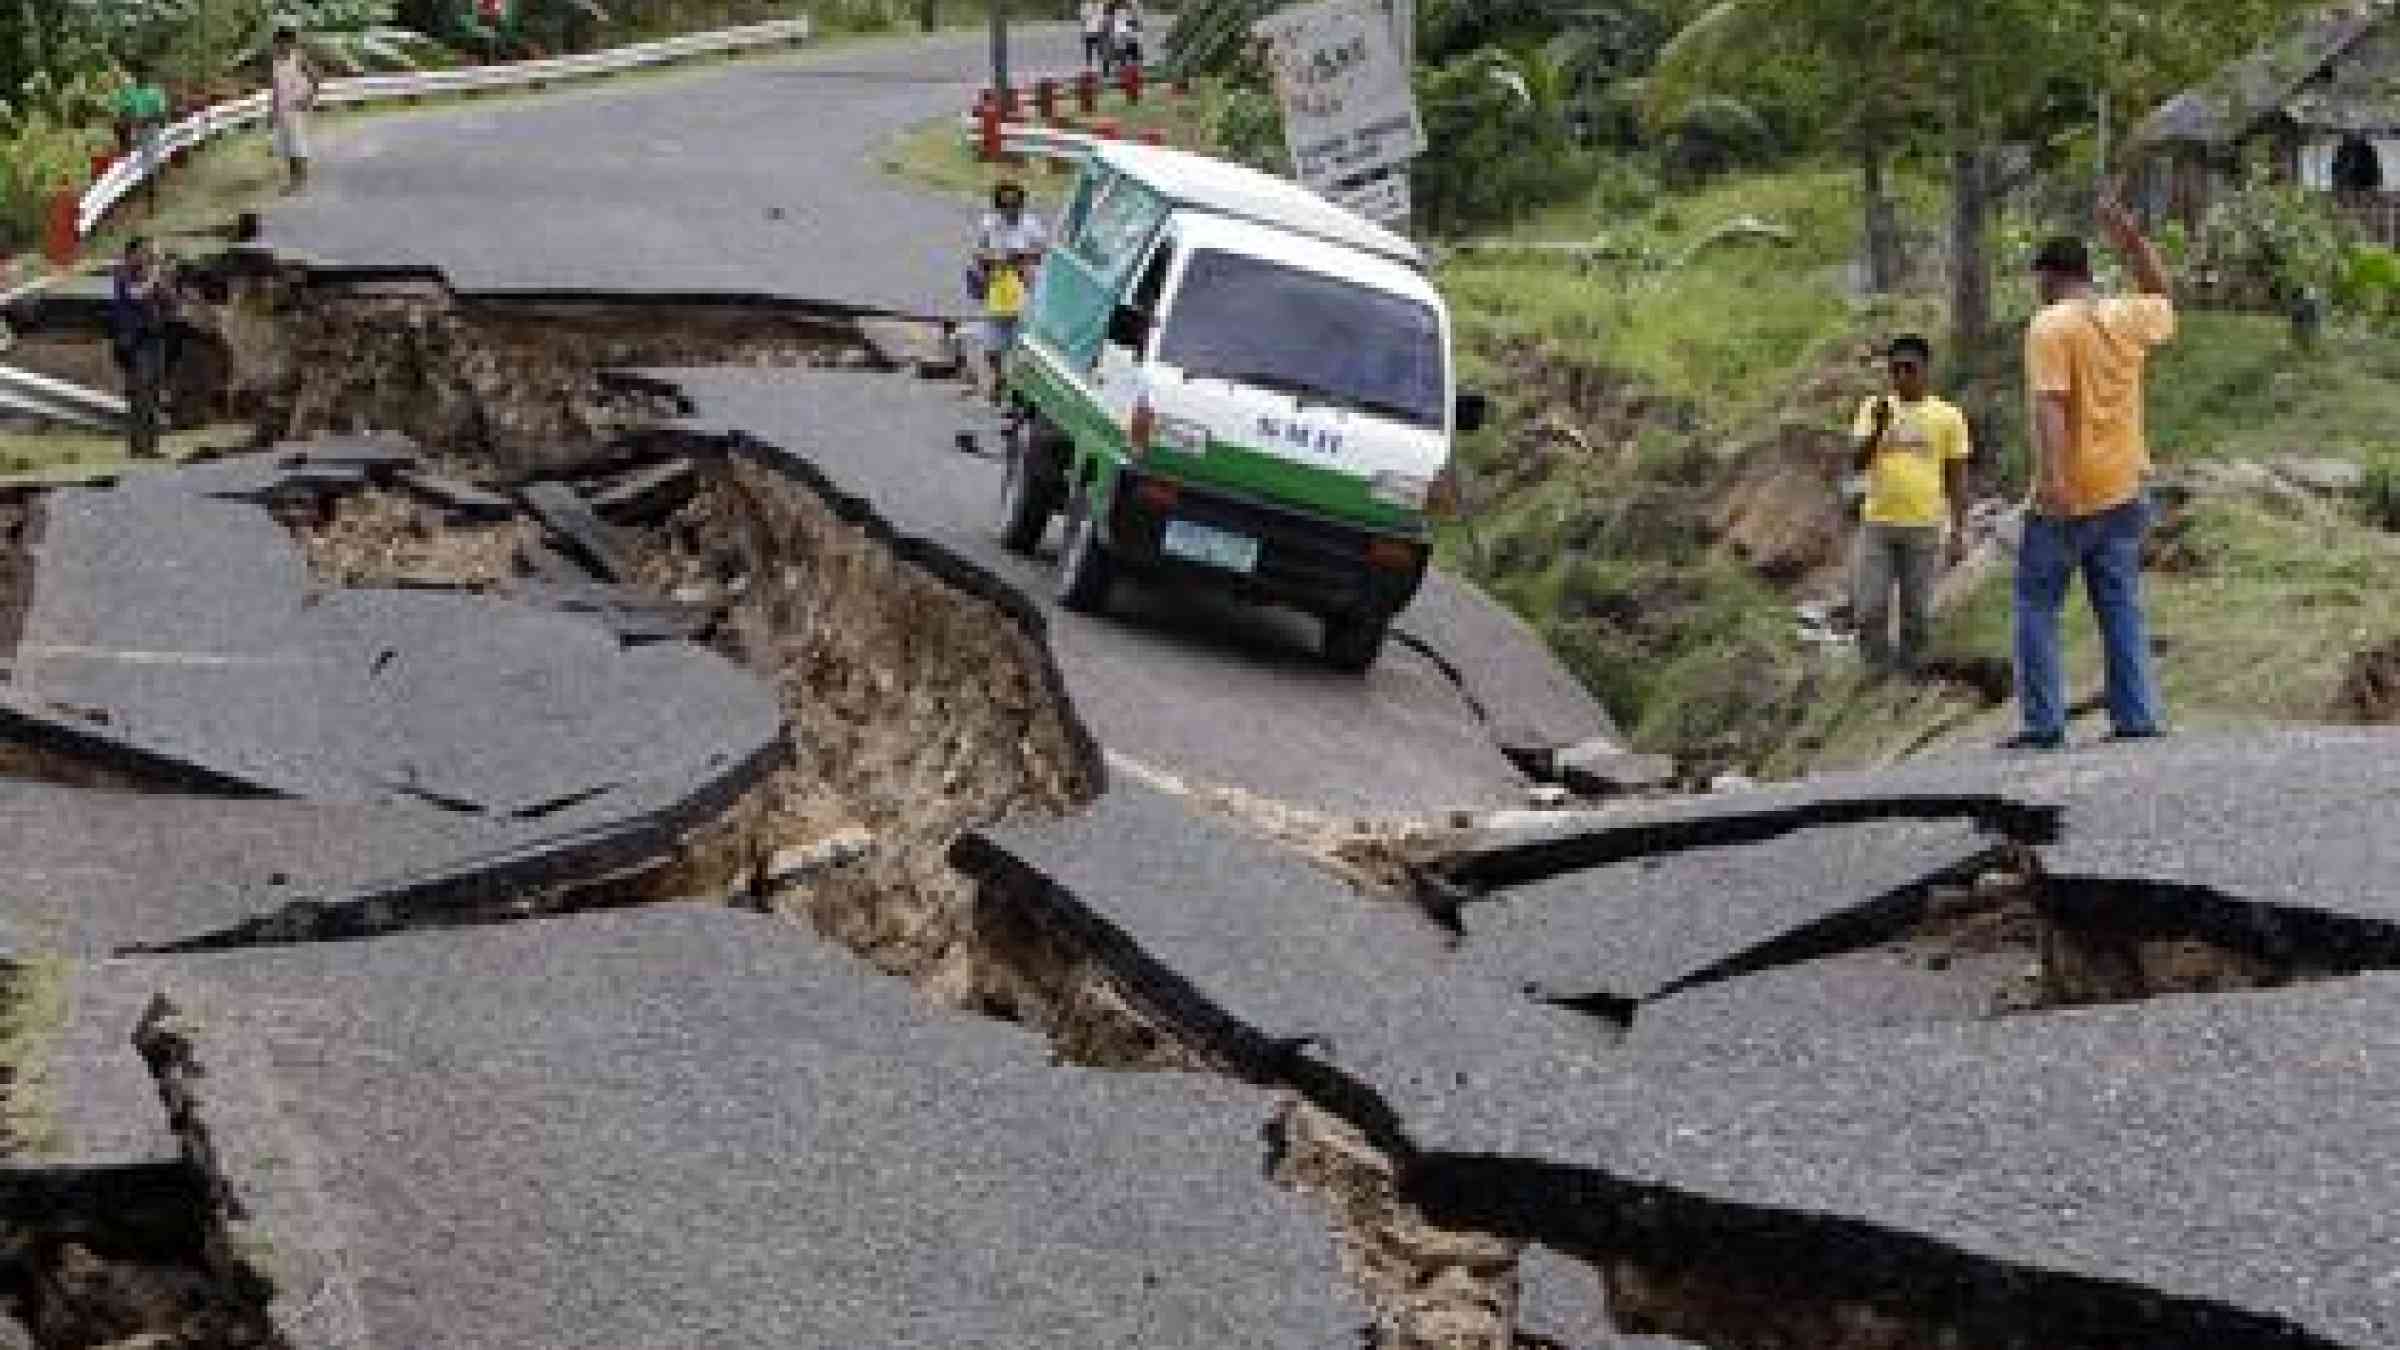 Filipinos drive past a damaged national highway after a 6.9-magnitude earthquake in Guihulngan Town, province of Negros Oriental, Central Philippines, on Feb. 7 (Dennis M. Sabangan / EPA)